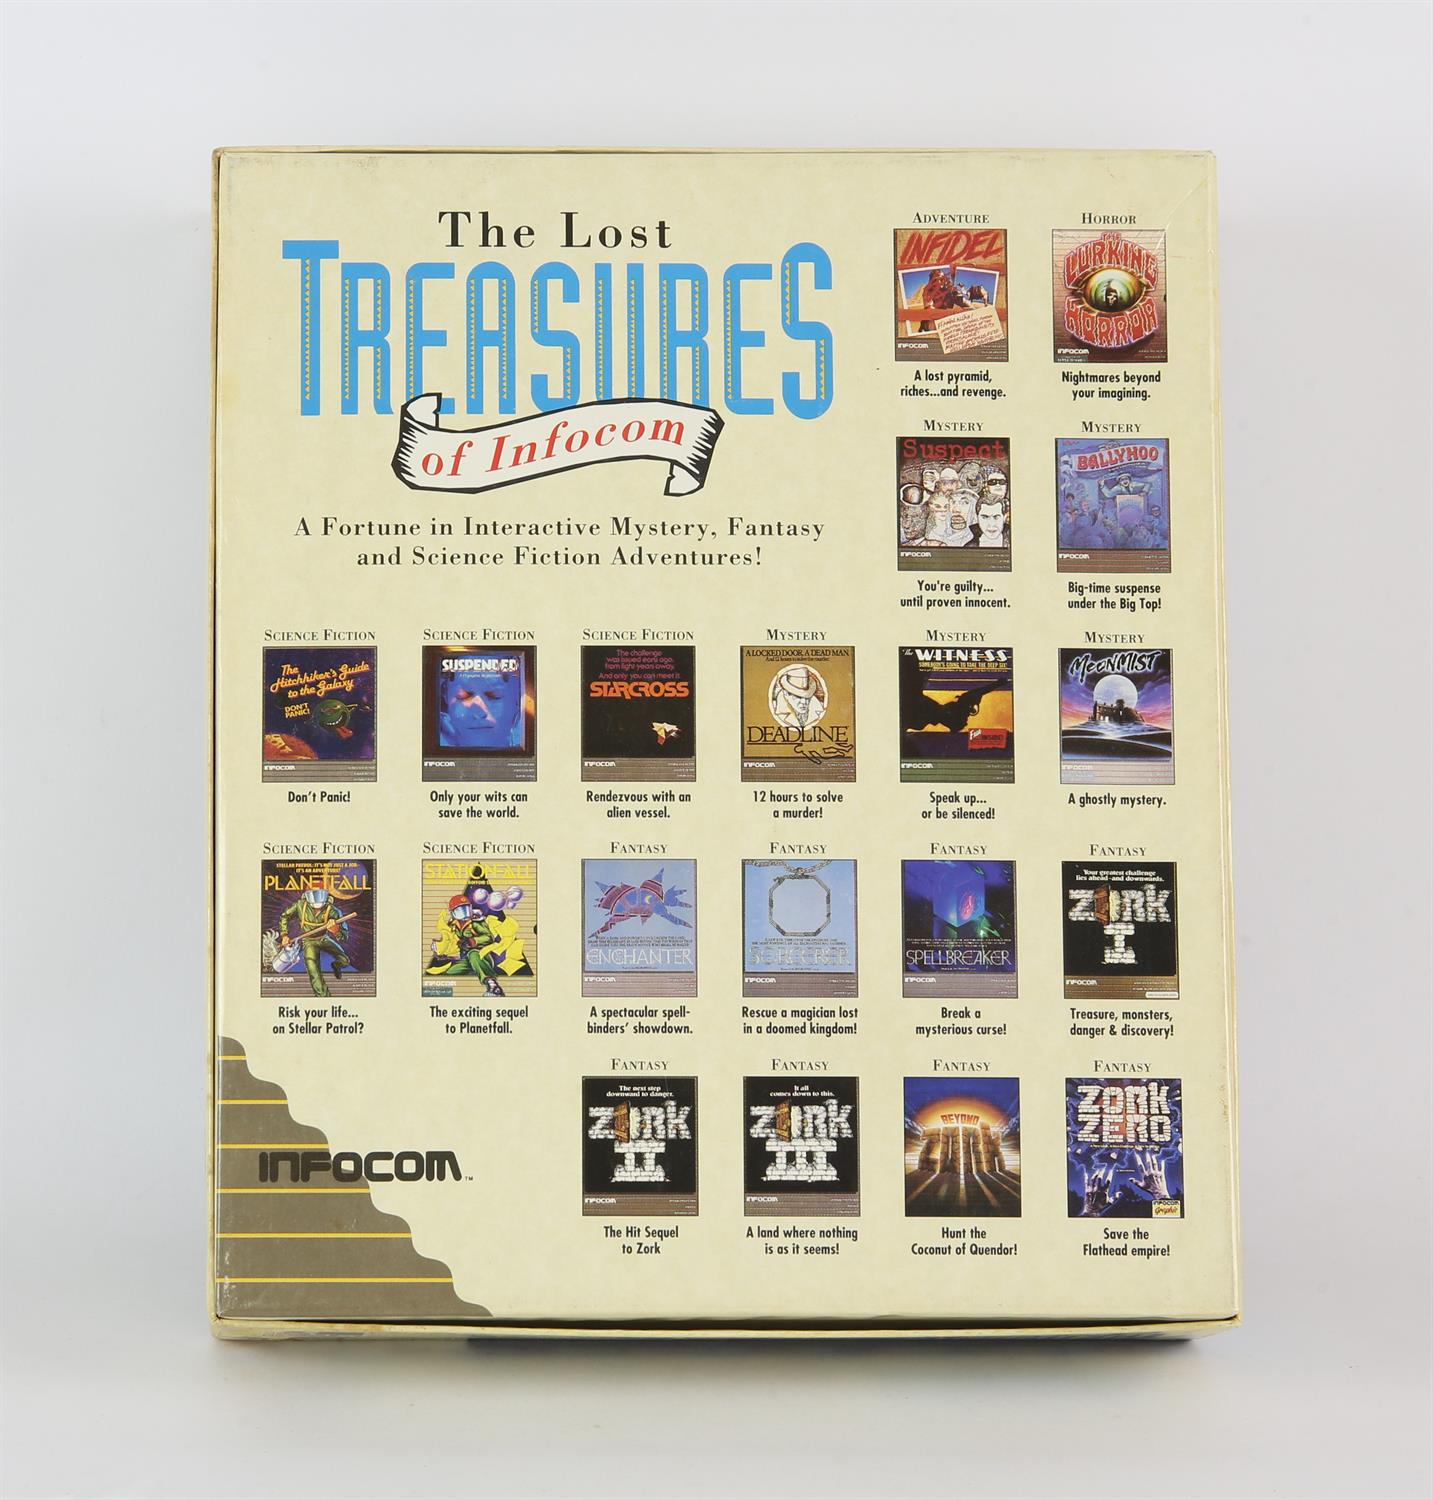 The lost treasures of Infocom IBM PC game 3.5" and 5.25" disks. - Image 2 of 2